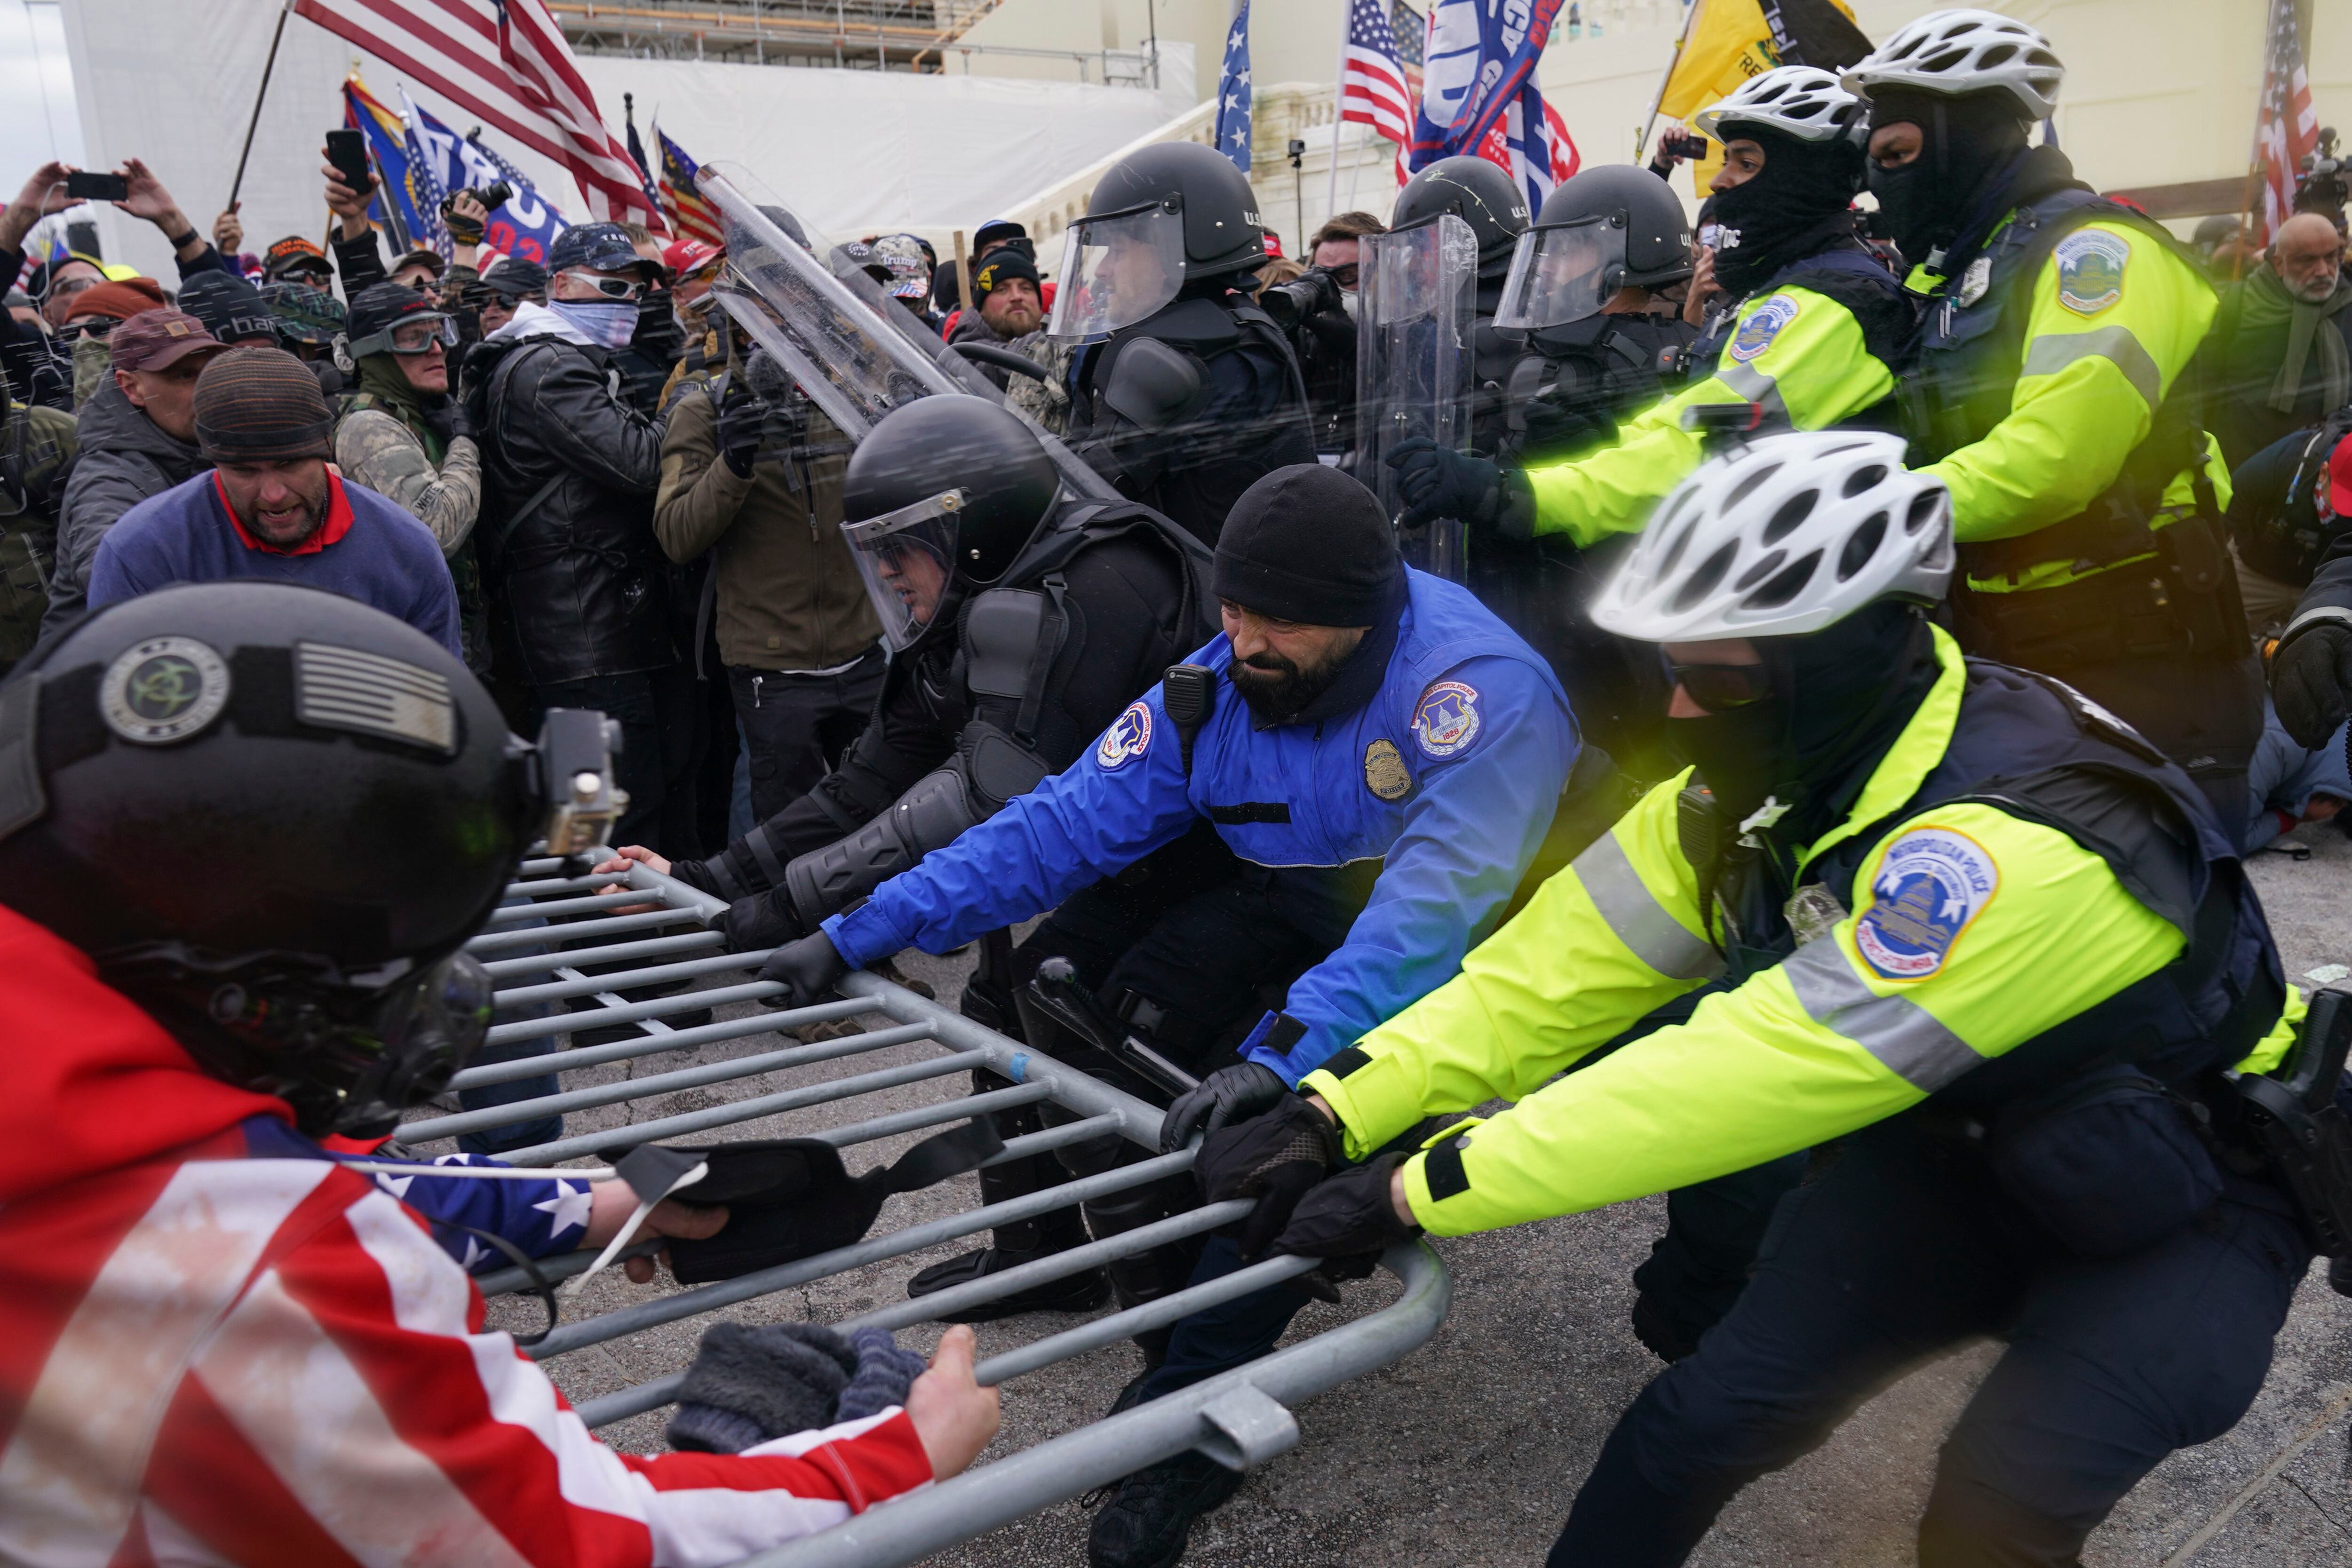 Newspaper editor interfered with police at Capitol riot